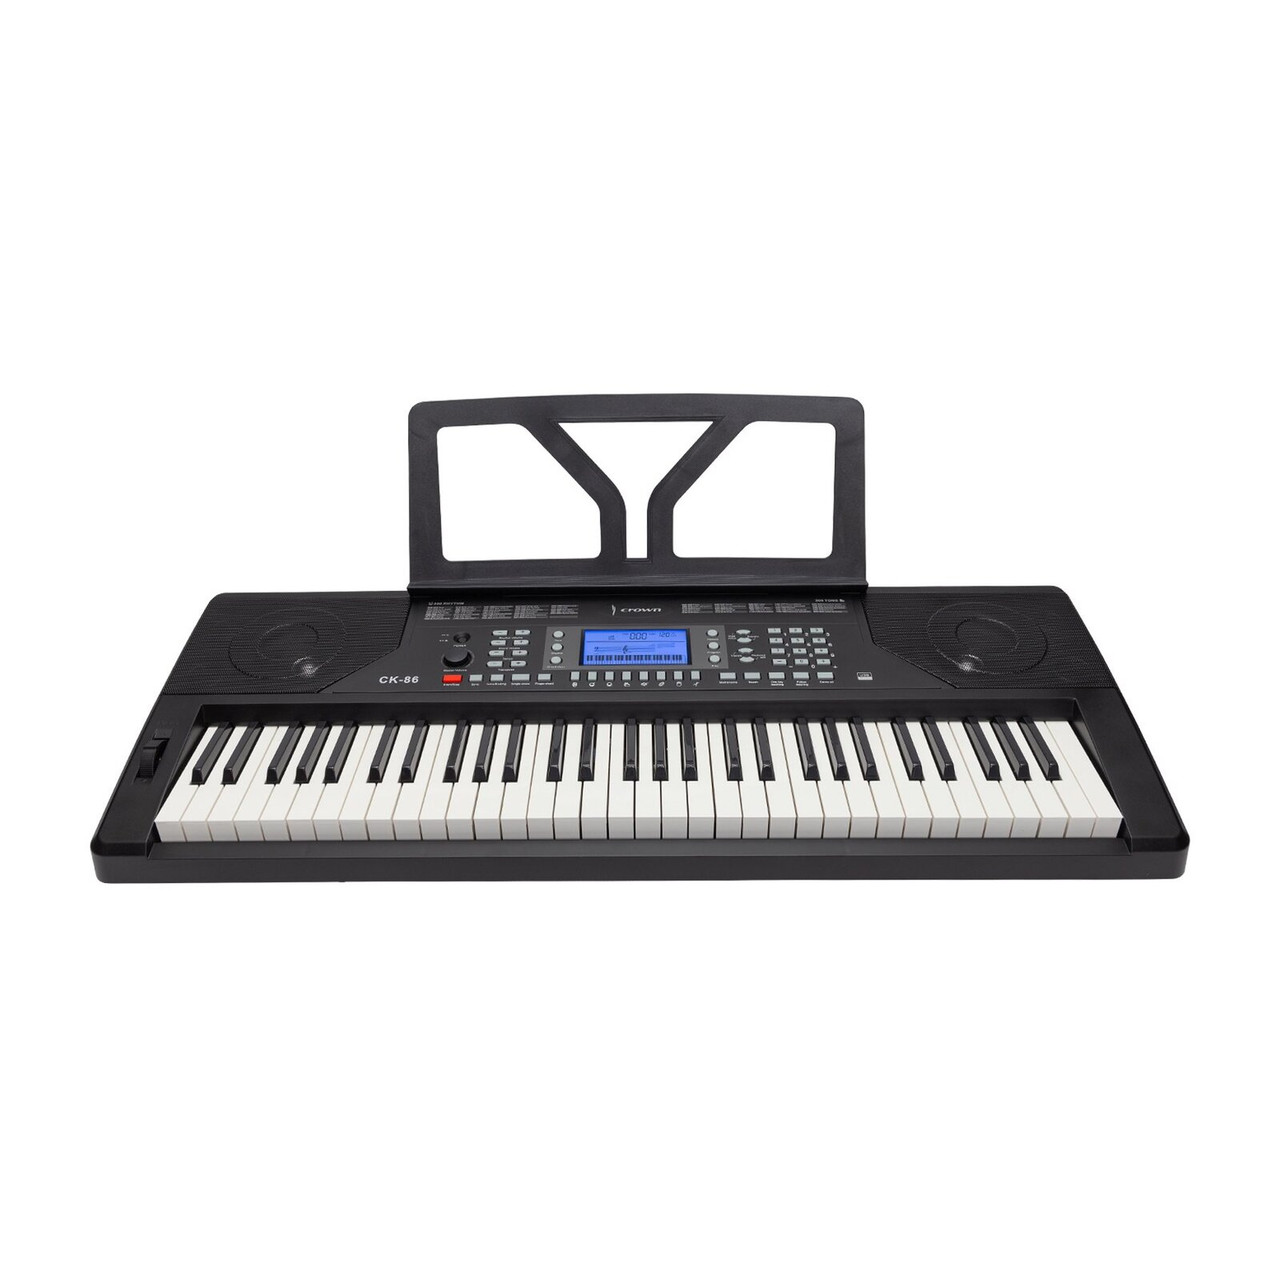 Crown CK-86-BLK 61 Touch Sensitive Multi-Function 61-Key Electronic Portable Keyboard with USB (Black)